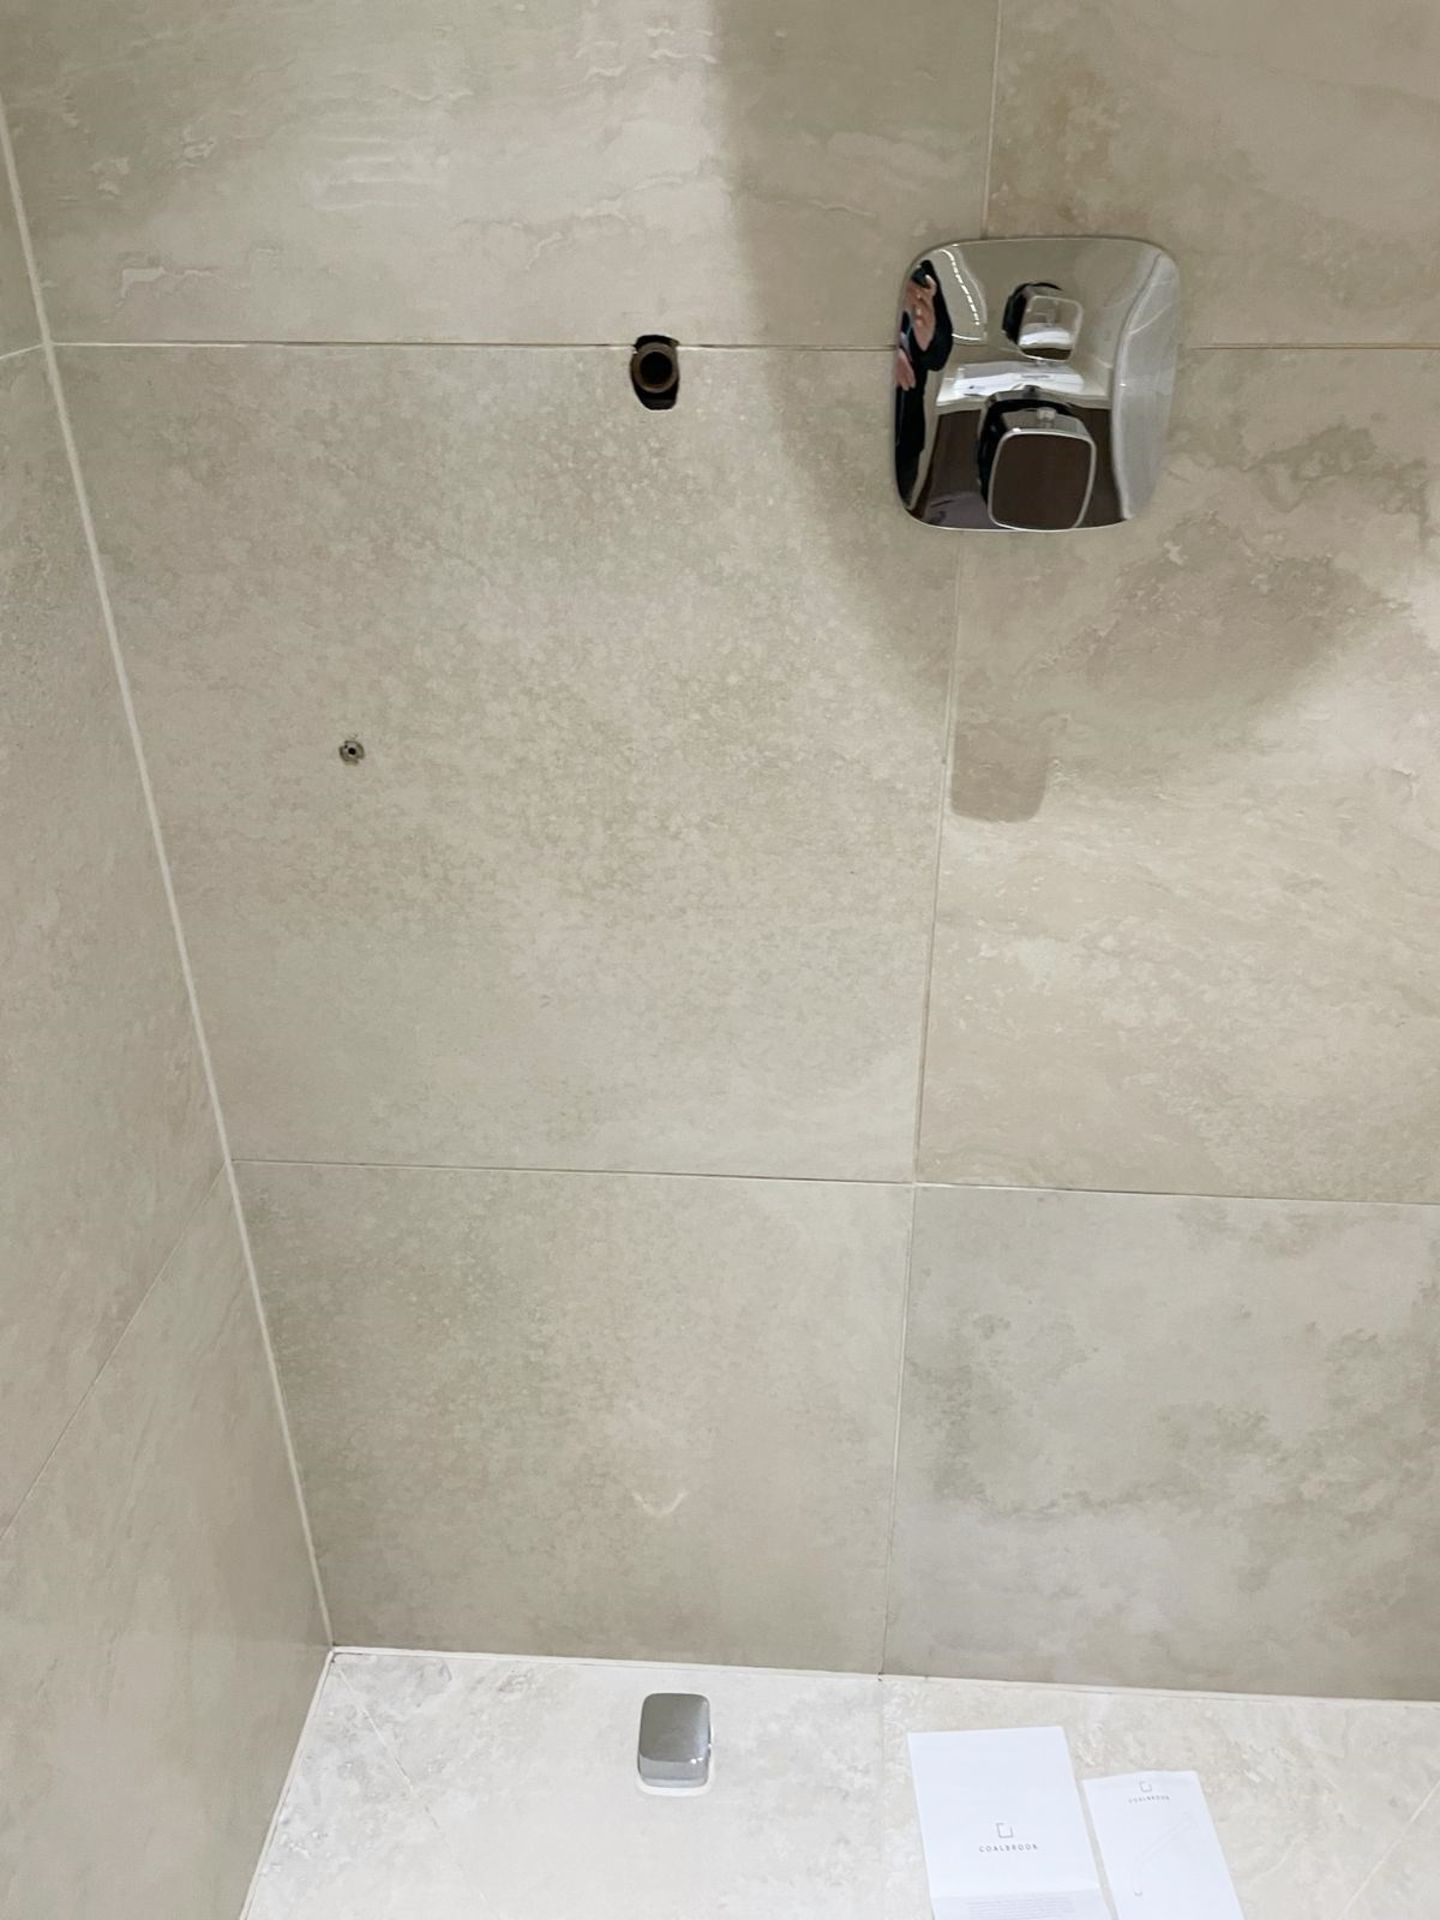 1 x Premium Shower and Enclosure + hansgrohe Controls and Thermostat - Ref: PAN251 / Bed2bth - CL896 - Image 7 of 15